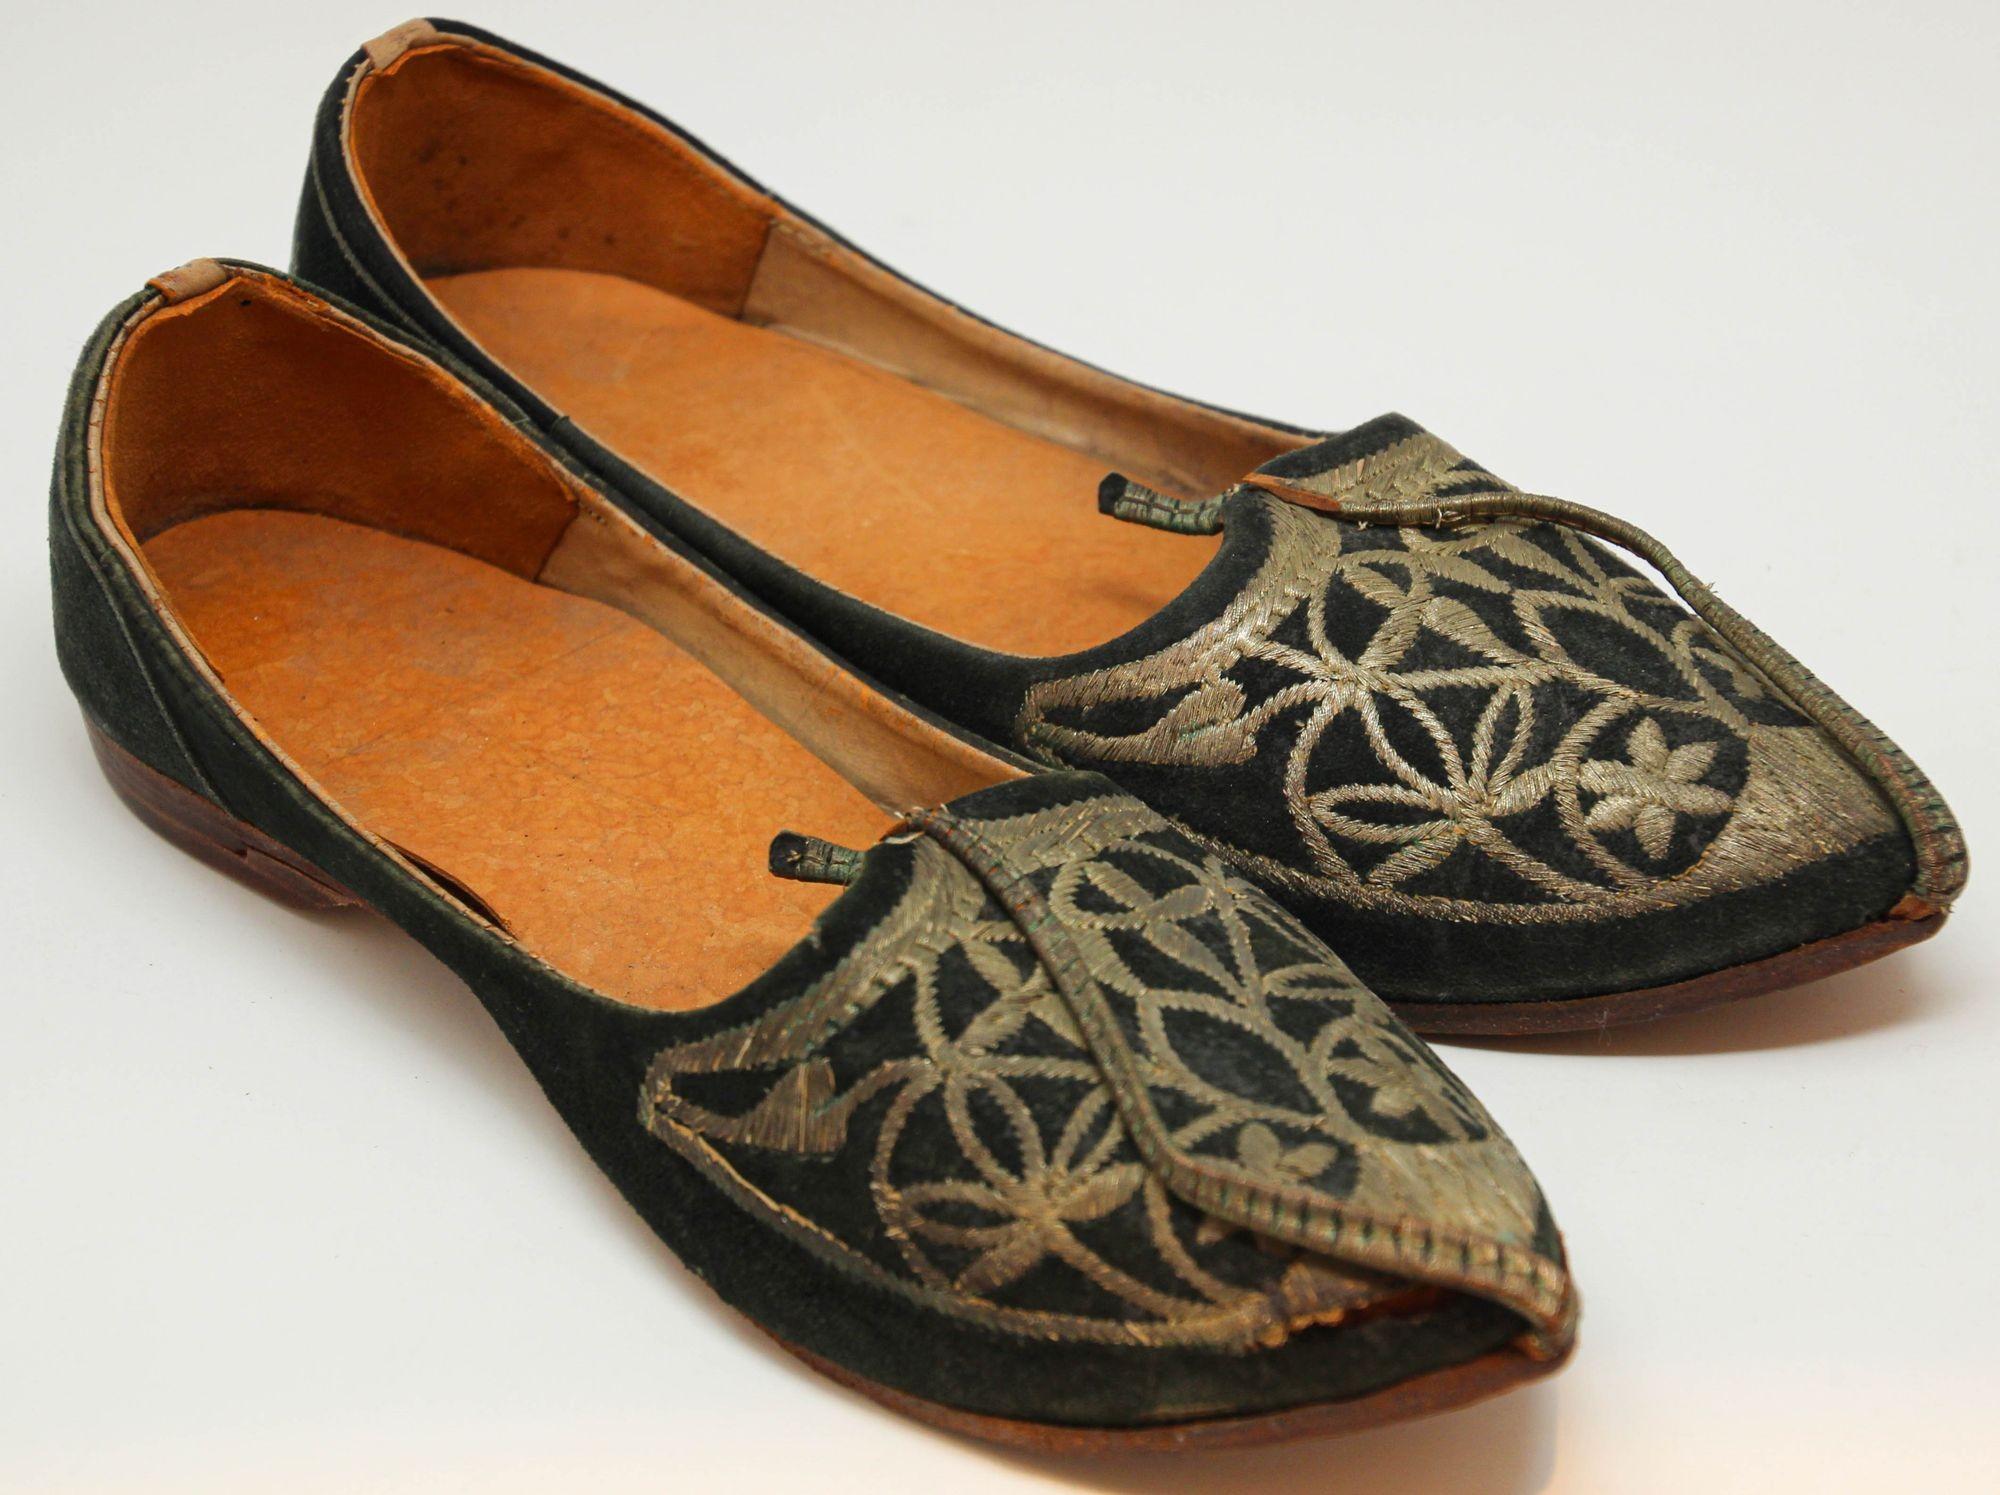 Moorish Mughal Style Curled Toe Black Leather Shoes from Tony Duquette Estate For Sale 6